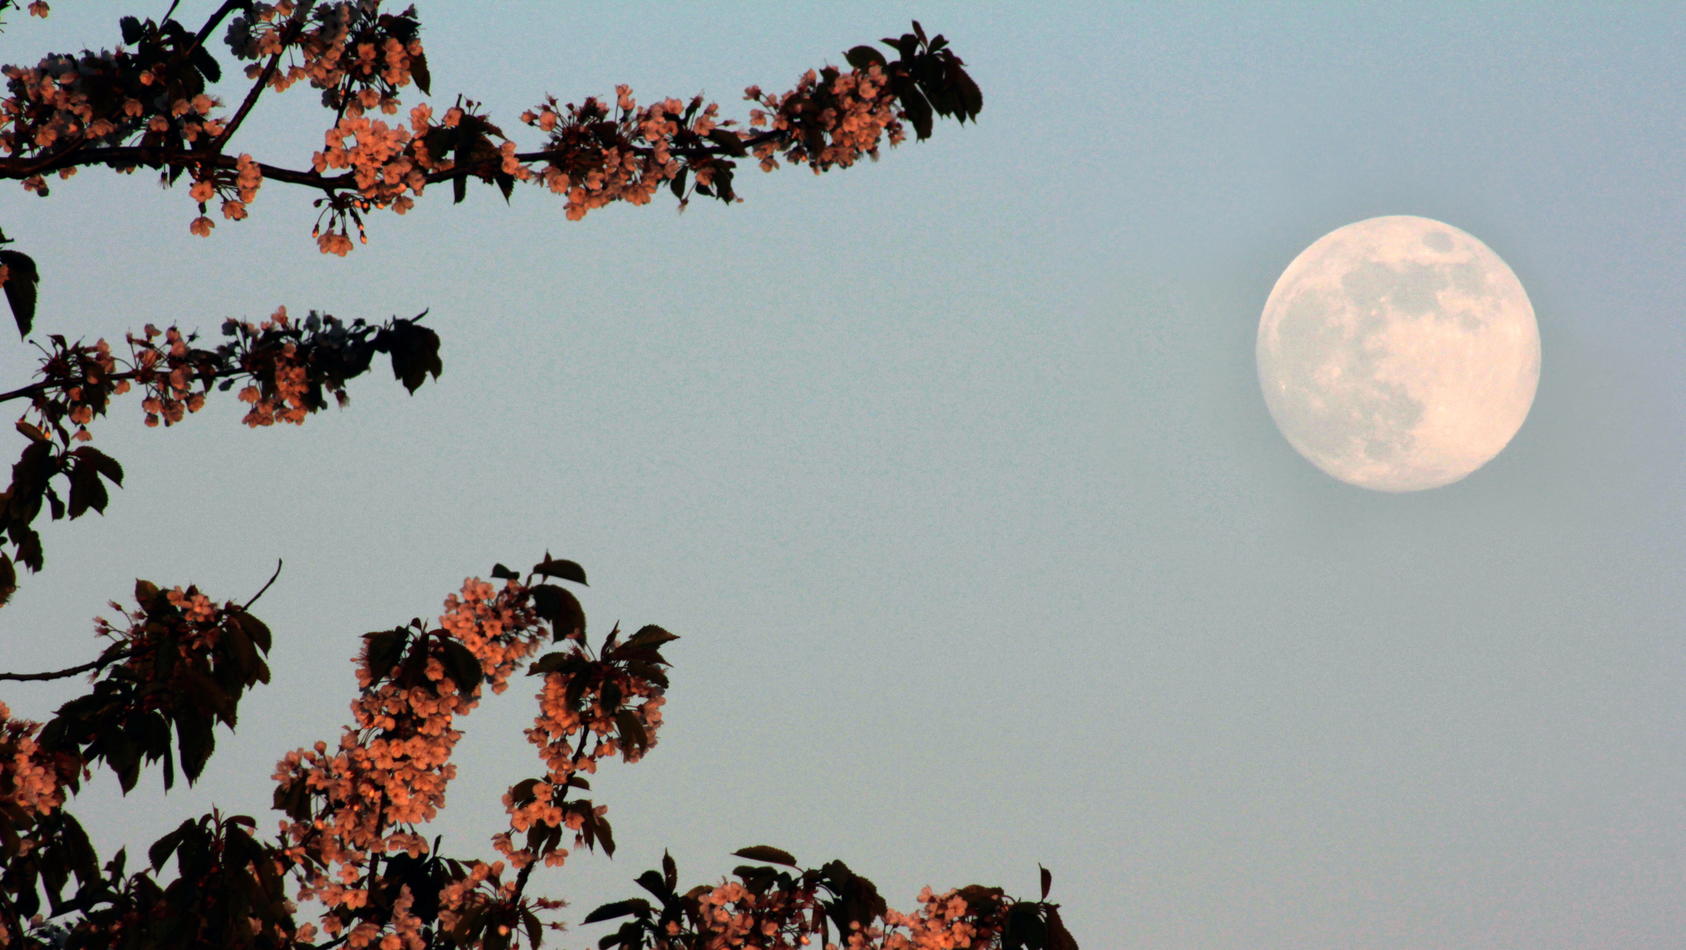 May 'flower moon' is the last Supermoon of 2020 seen with Cherry Blossom from Newcastle's Town Moor. This full moon of May, also called the Flower Moon will come just two days after the moon reaches perigee, or the closest point to Earth in its orbit